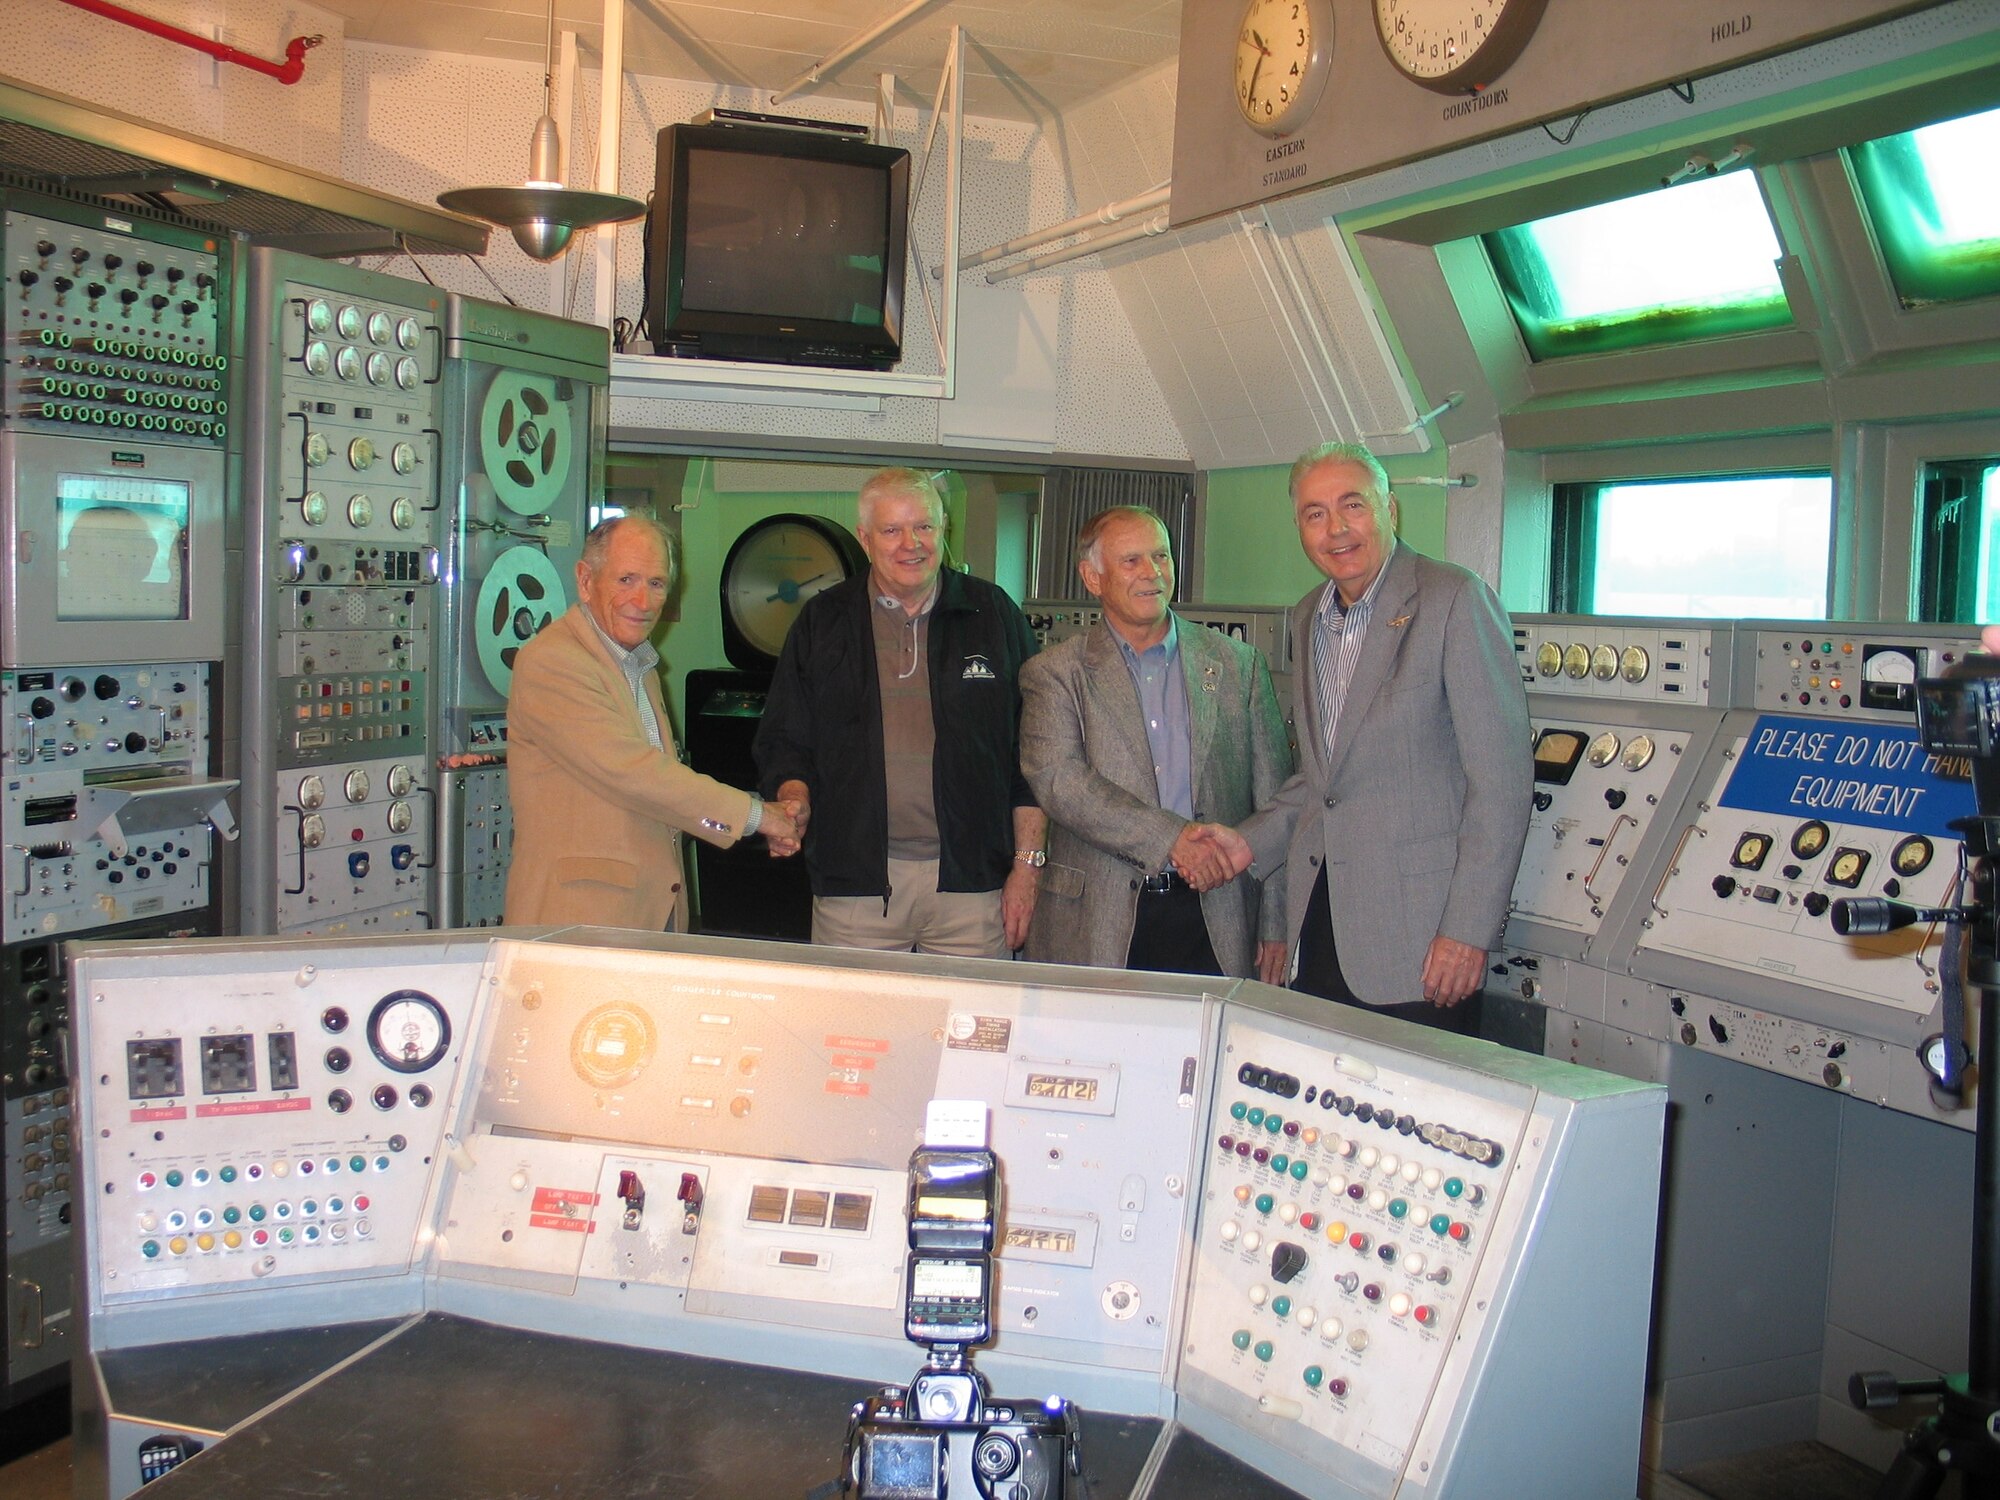 Explorer 1 veterans (from left) Ike Rigell, Terry Greenfield, Norm Perry and John Meisenheimer Sr. reminisce recently inside the original blockhouse at Launch Complex 26 at Cape Canaveral AFS.  All four played critical roles in launching America’s first satellite and believe the mission vaulted America firmly into the Space Age.  (USAF Photo by Ken Warren)